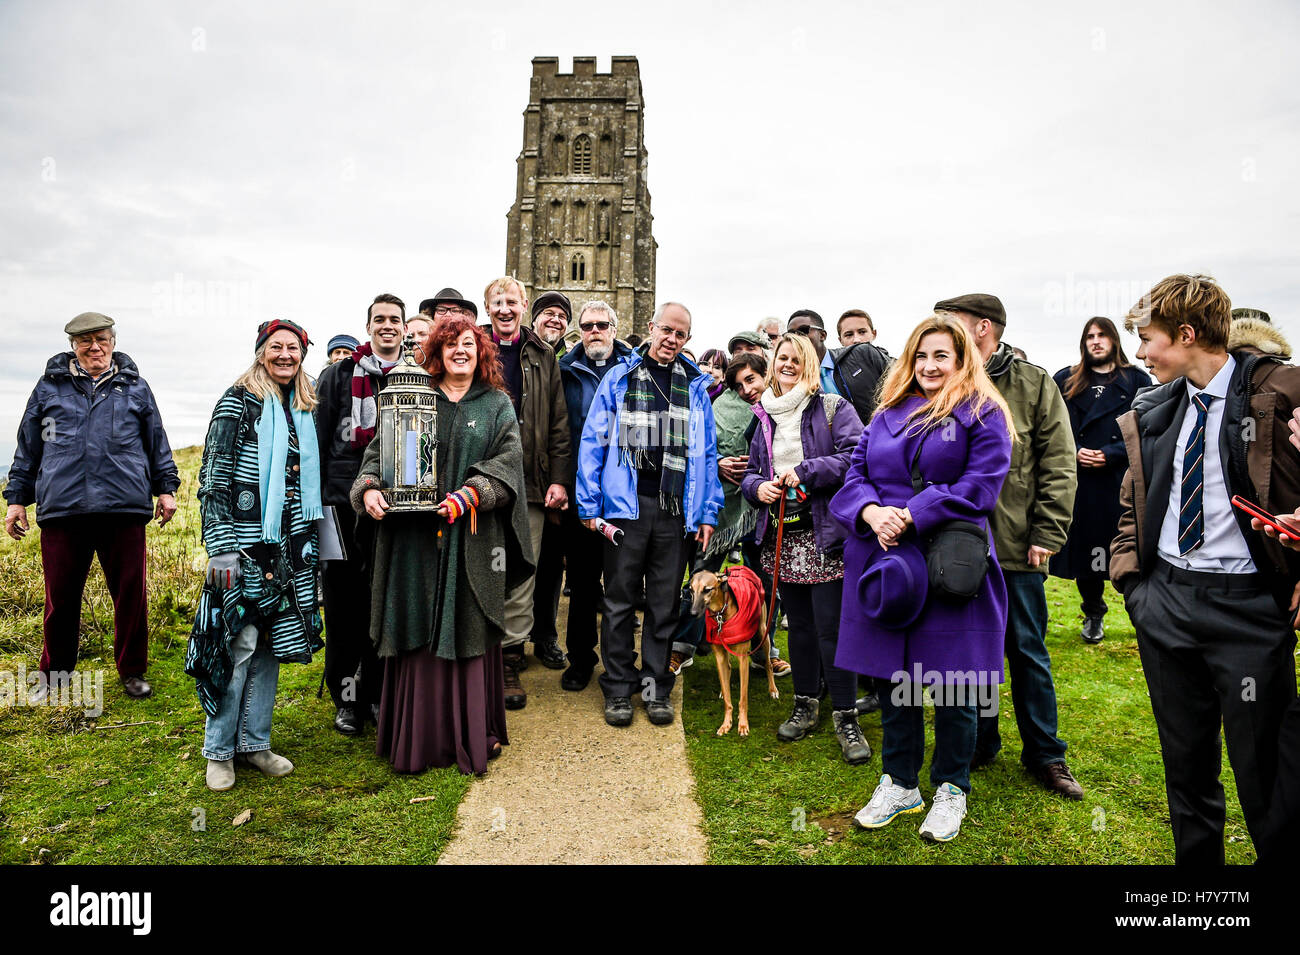 The Archbishop of Canterbury, the Most Rev Justin Welby descends the 301 steps at Glastonbury Tor accompanied by local clergy, parishoners and people of other faith and spiritual groups during his visit to the Somerset area. Stock Photo